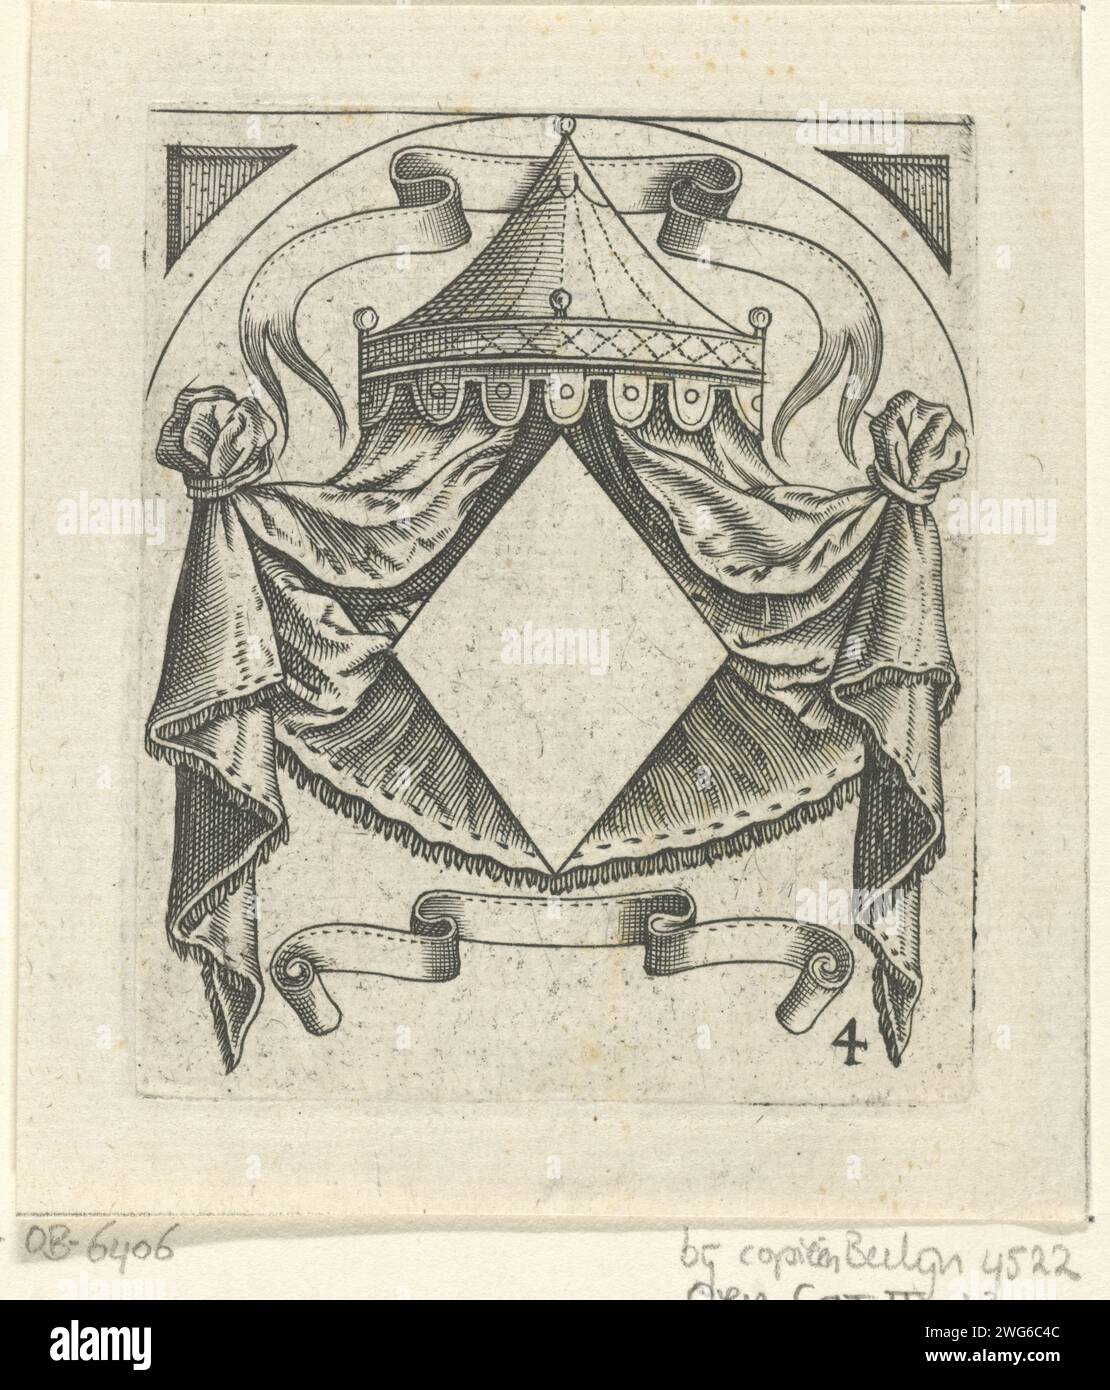 Coat of arms with diamond -shaped field under canopy, 1625 print Leaf from series of coats of arms with empty compartments. Amsterdam paper engraving Stock Photo